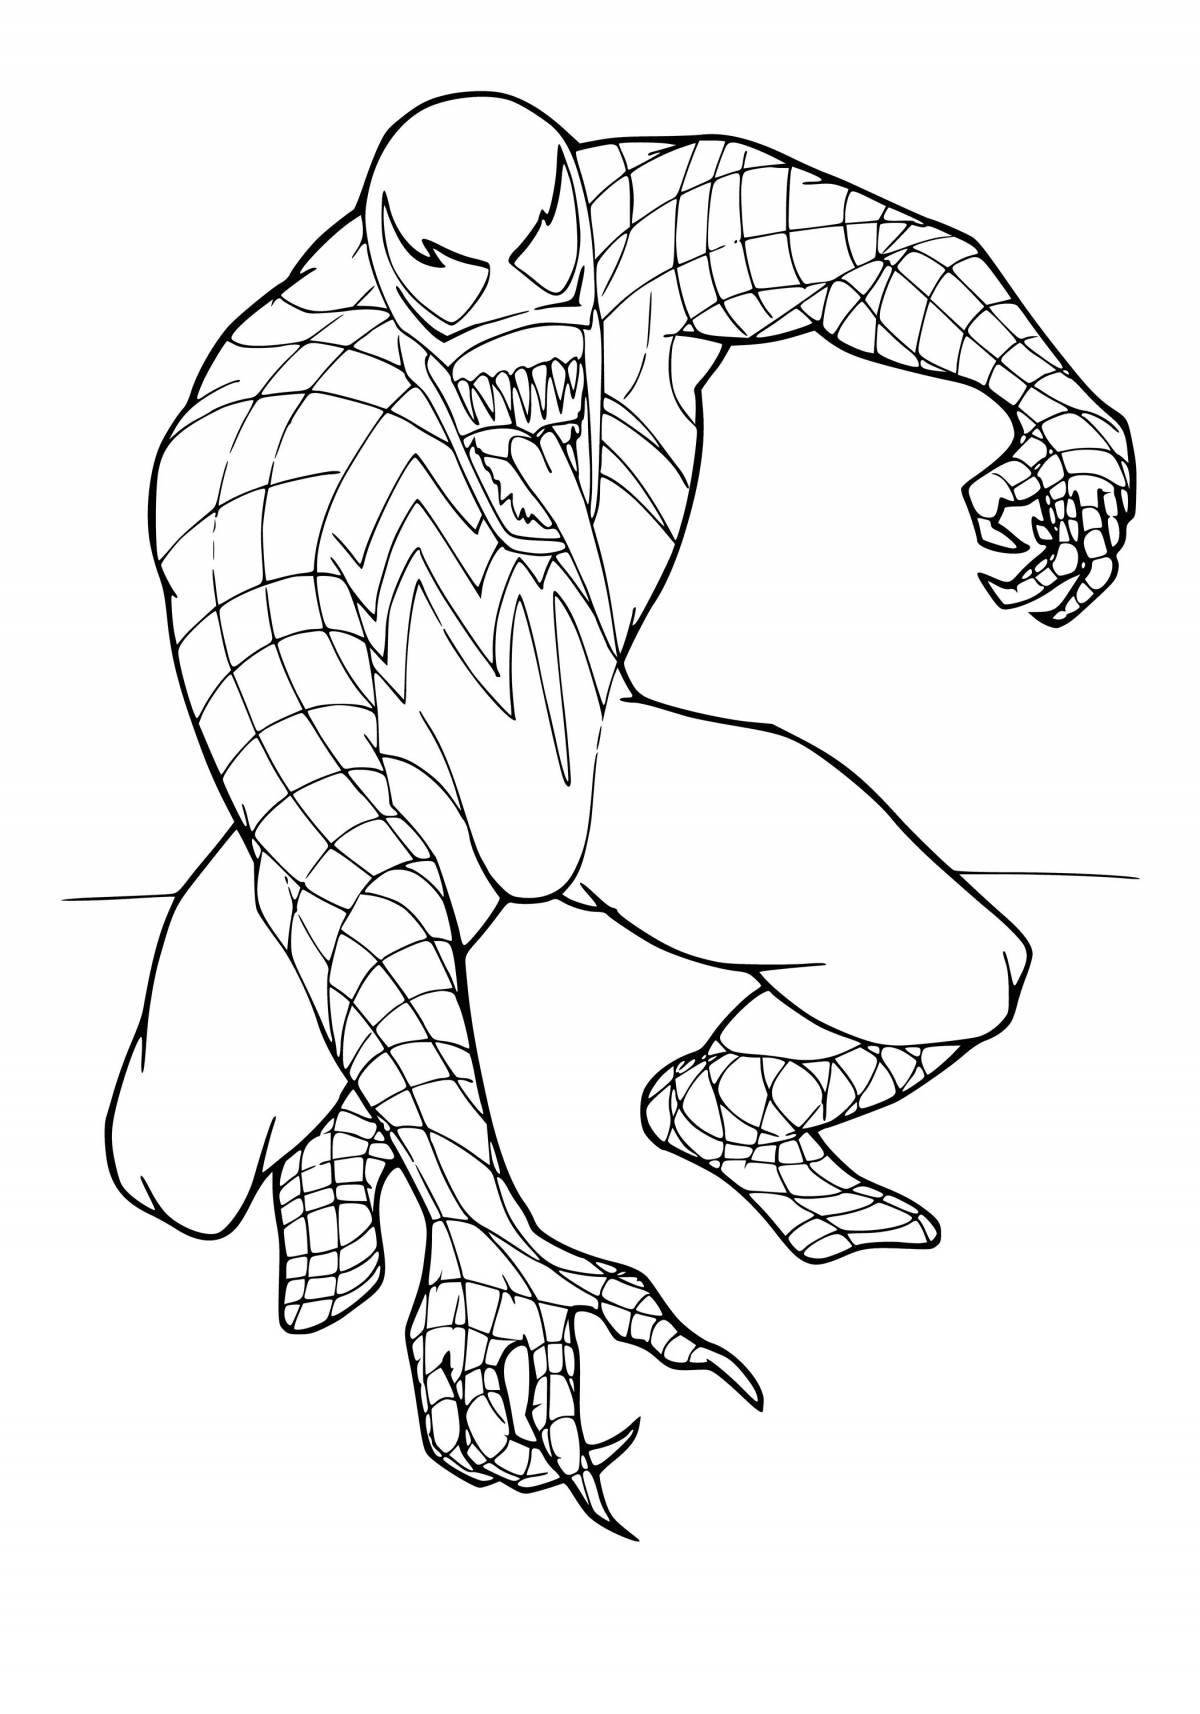 Spider-man bright Christmas coloring book